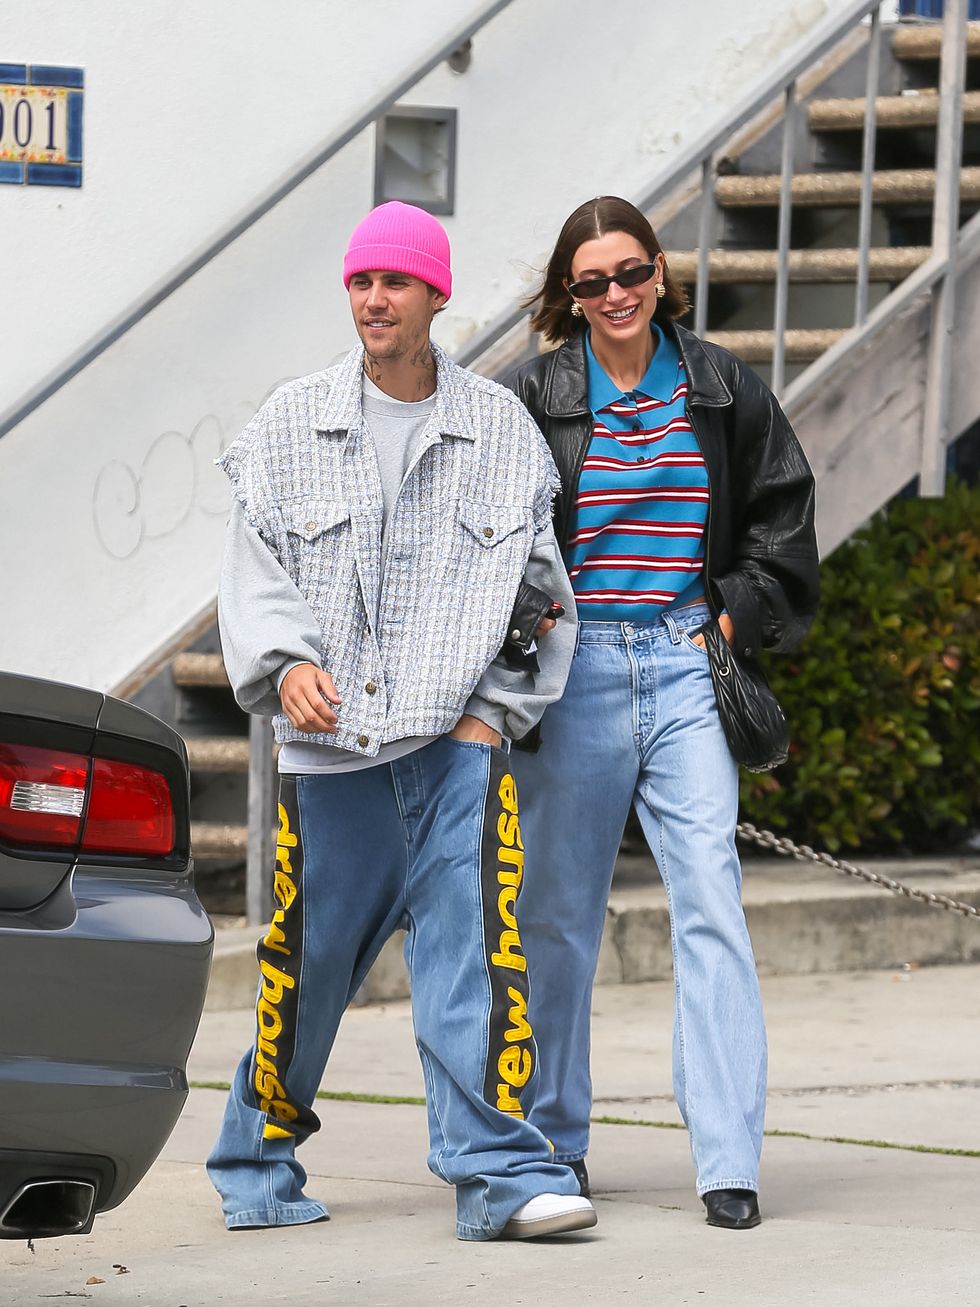 los angeles, ca march 13 justin bieber and hailey bieber are seen on march 13, 2023 in los angeles, california photo by thecelebrityfinderbauer griffingc images